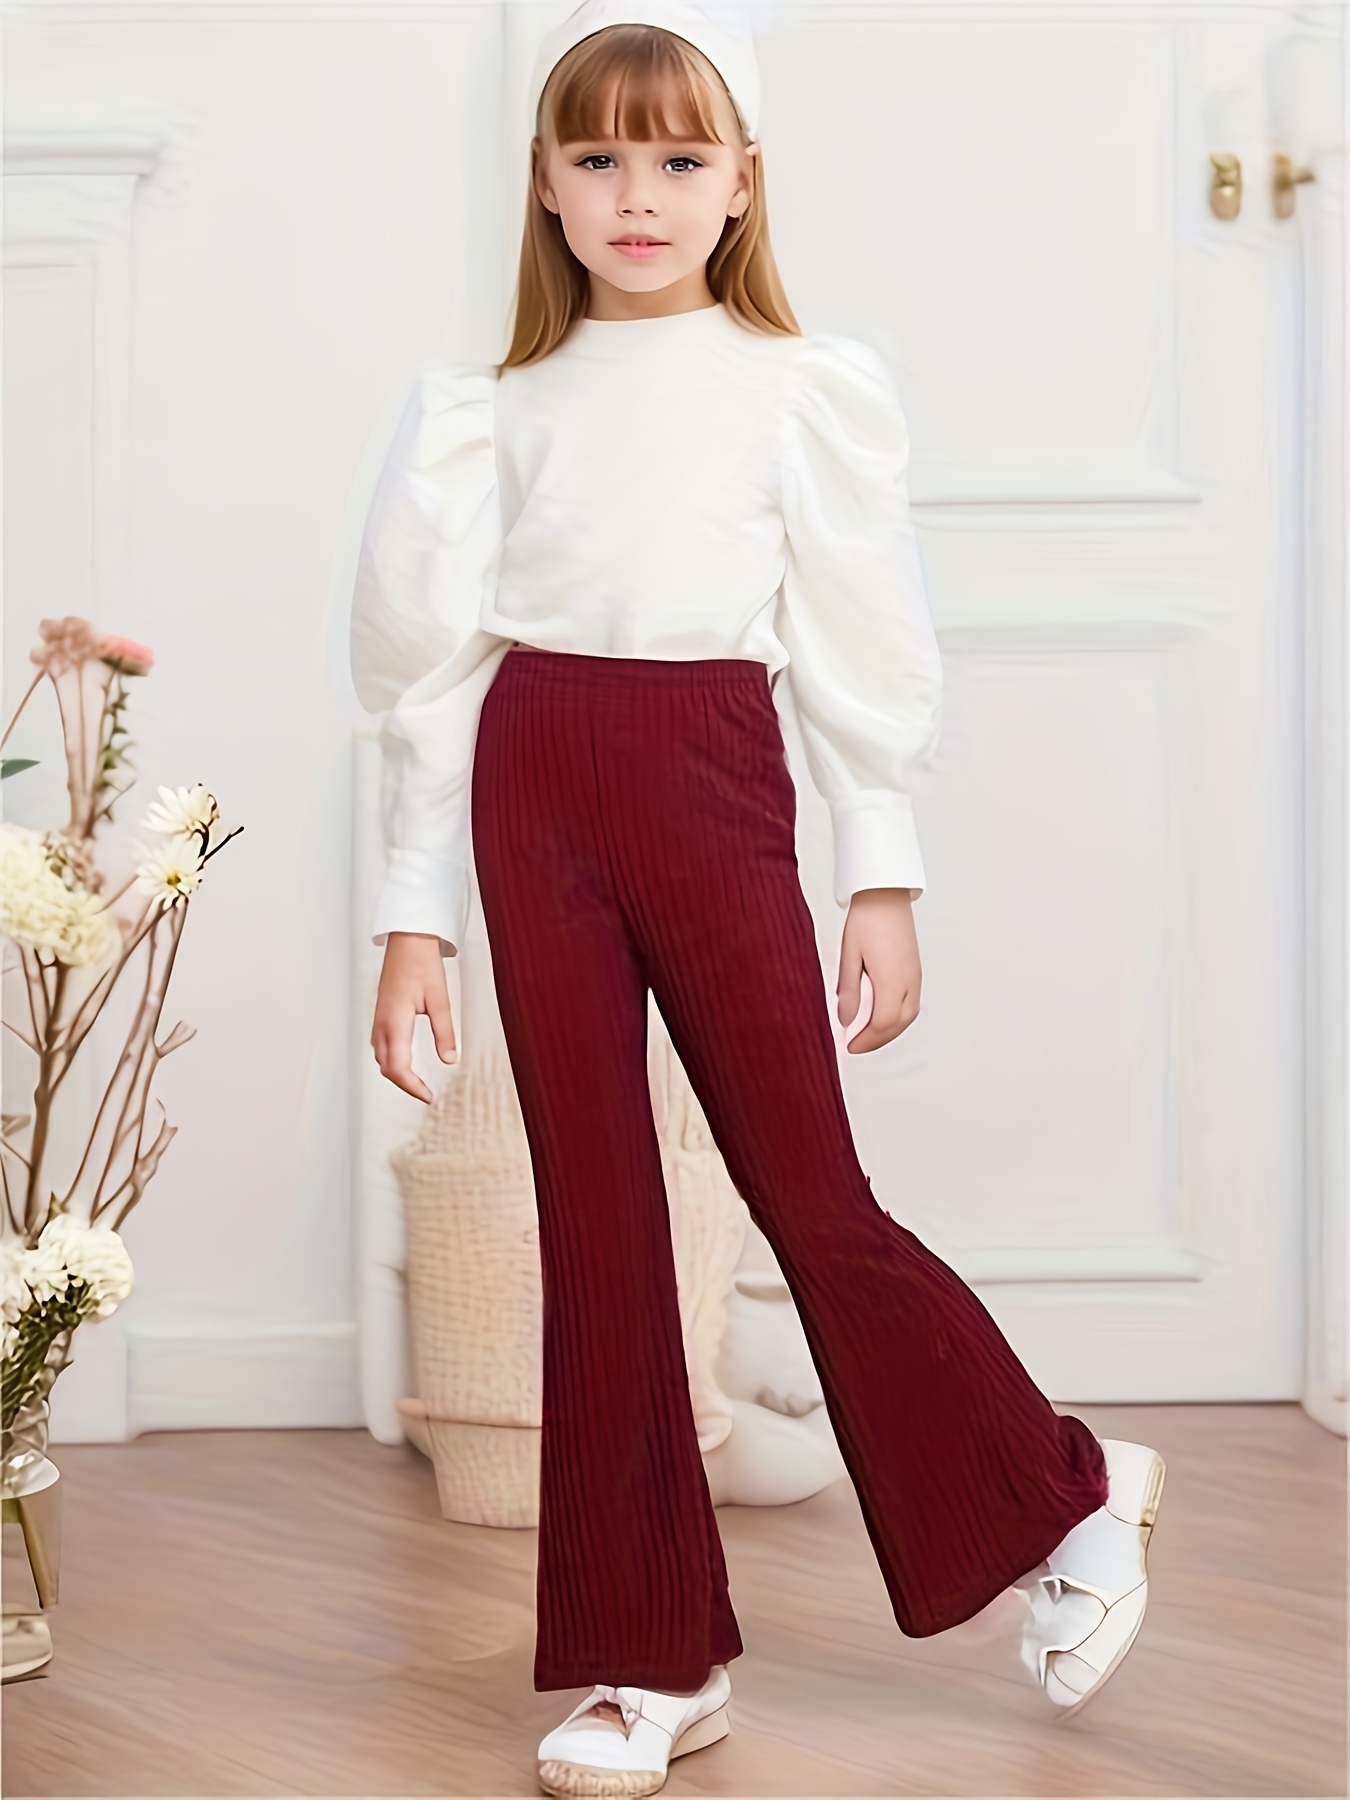 New Fashion Black White Dark Grey Flared Pants for Girls 12 14 Years Old  Kids Split Ends Pants High Waist Suit Elastic Trousers